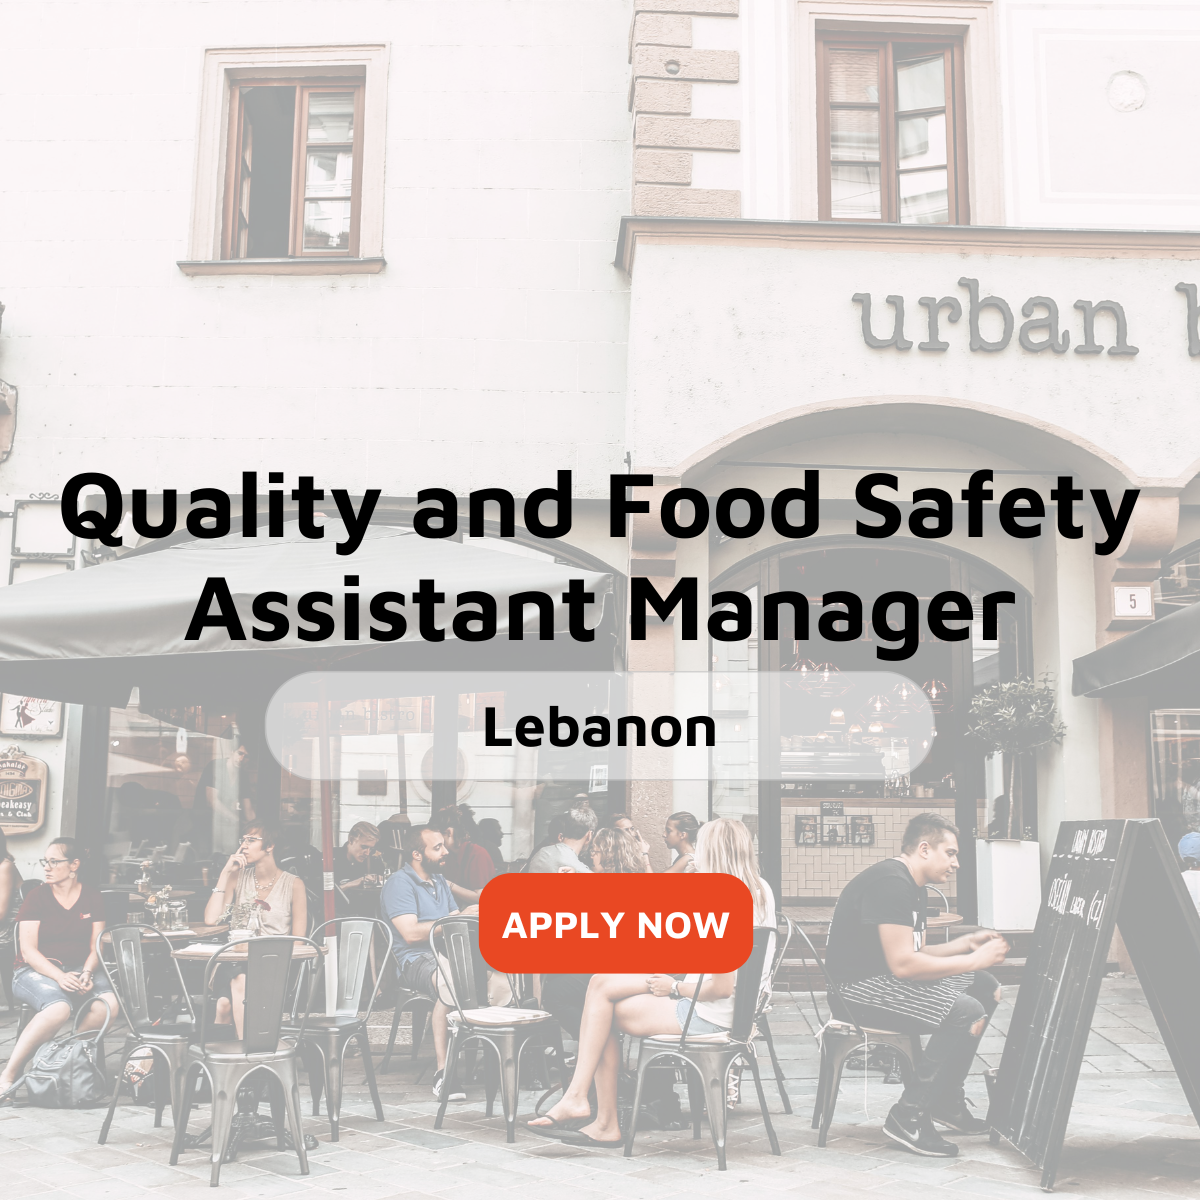 Quality and Food Safety Assistant Manager